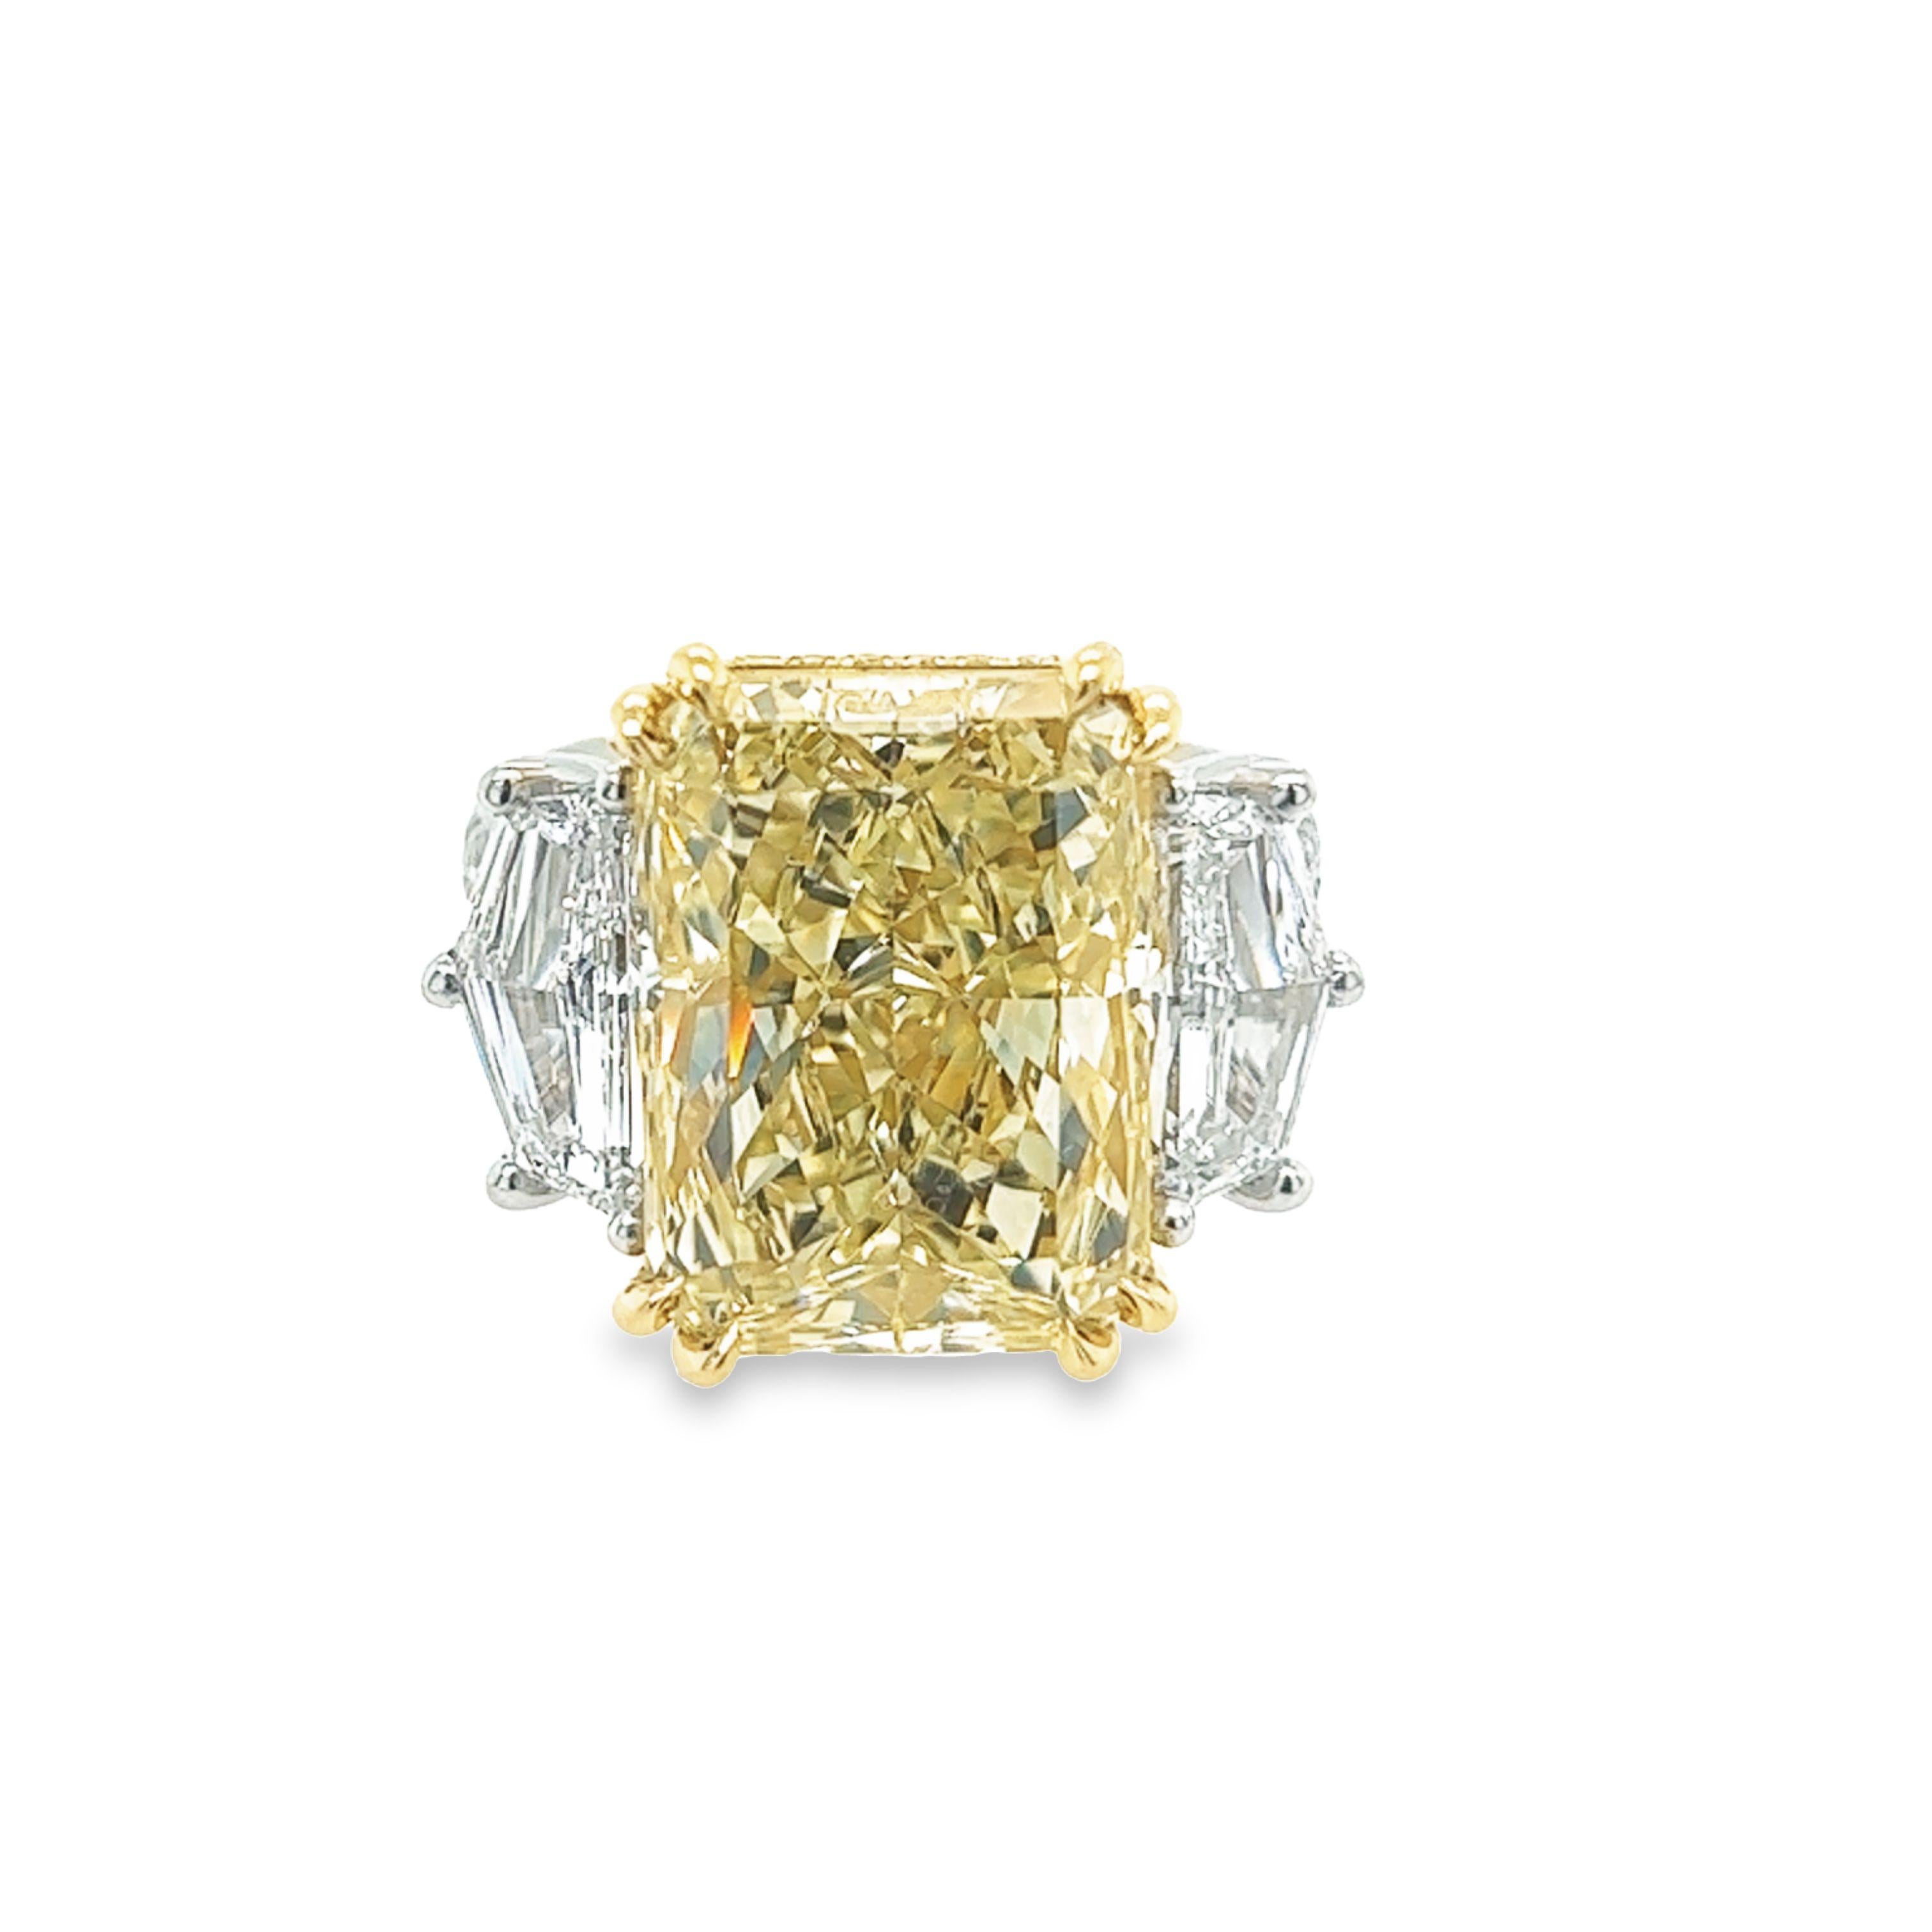 Rosenberg Diamonds & Co. 11.18 carat Radiant Cut Fancy Light Yellow VVS2 clarity is accompanied by a GIA certificate. This extraordinary radiant cut is set in a handmade platinum & 18k yellow gold setting with perfectly matched pair of epaulette